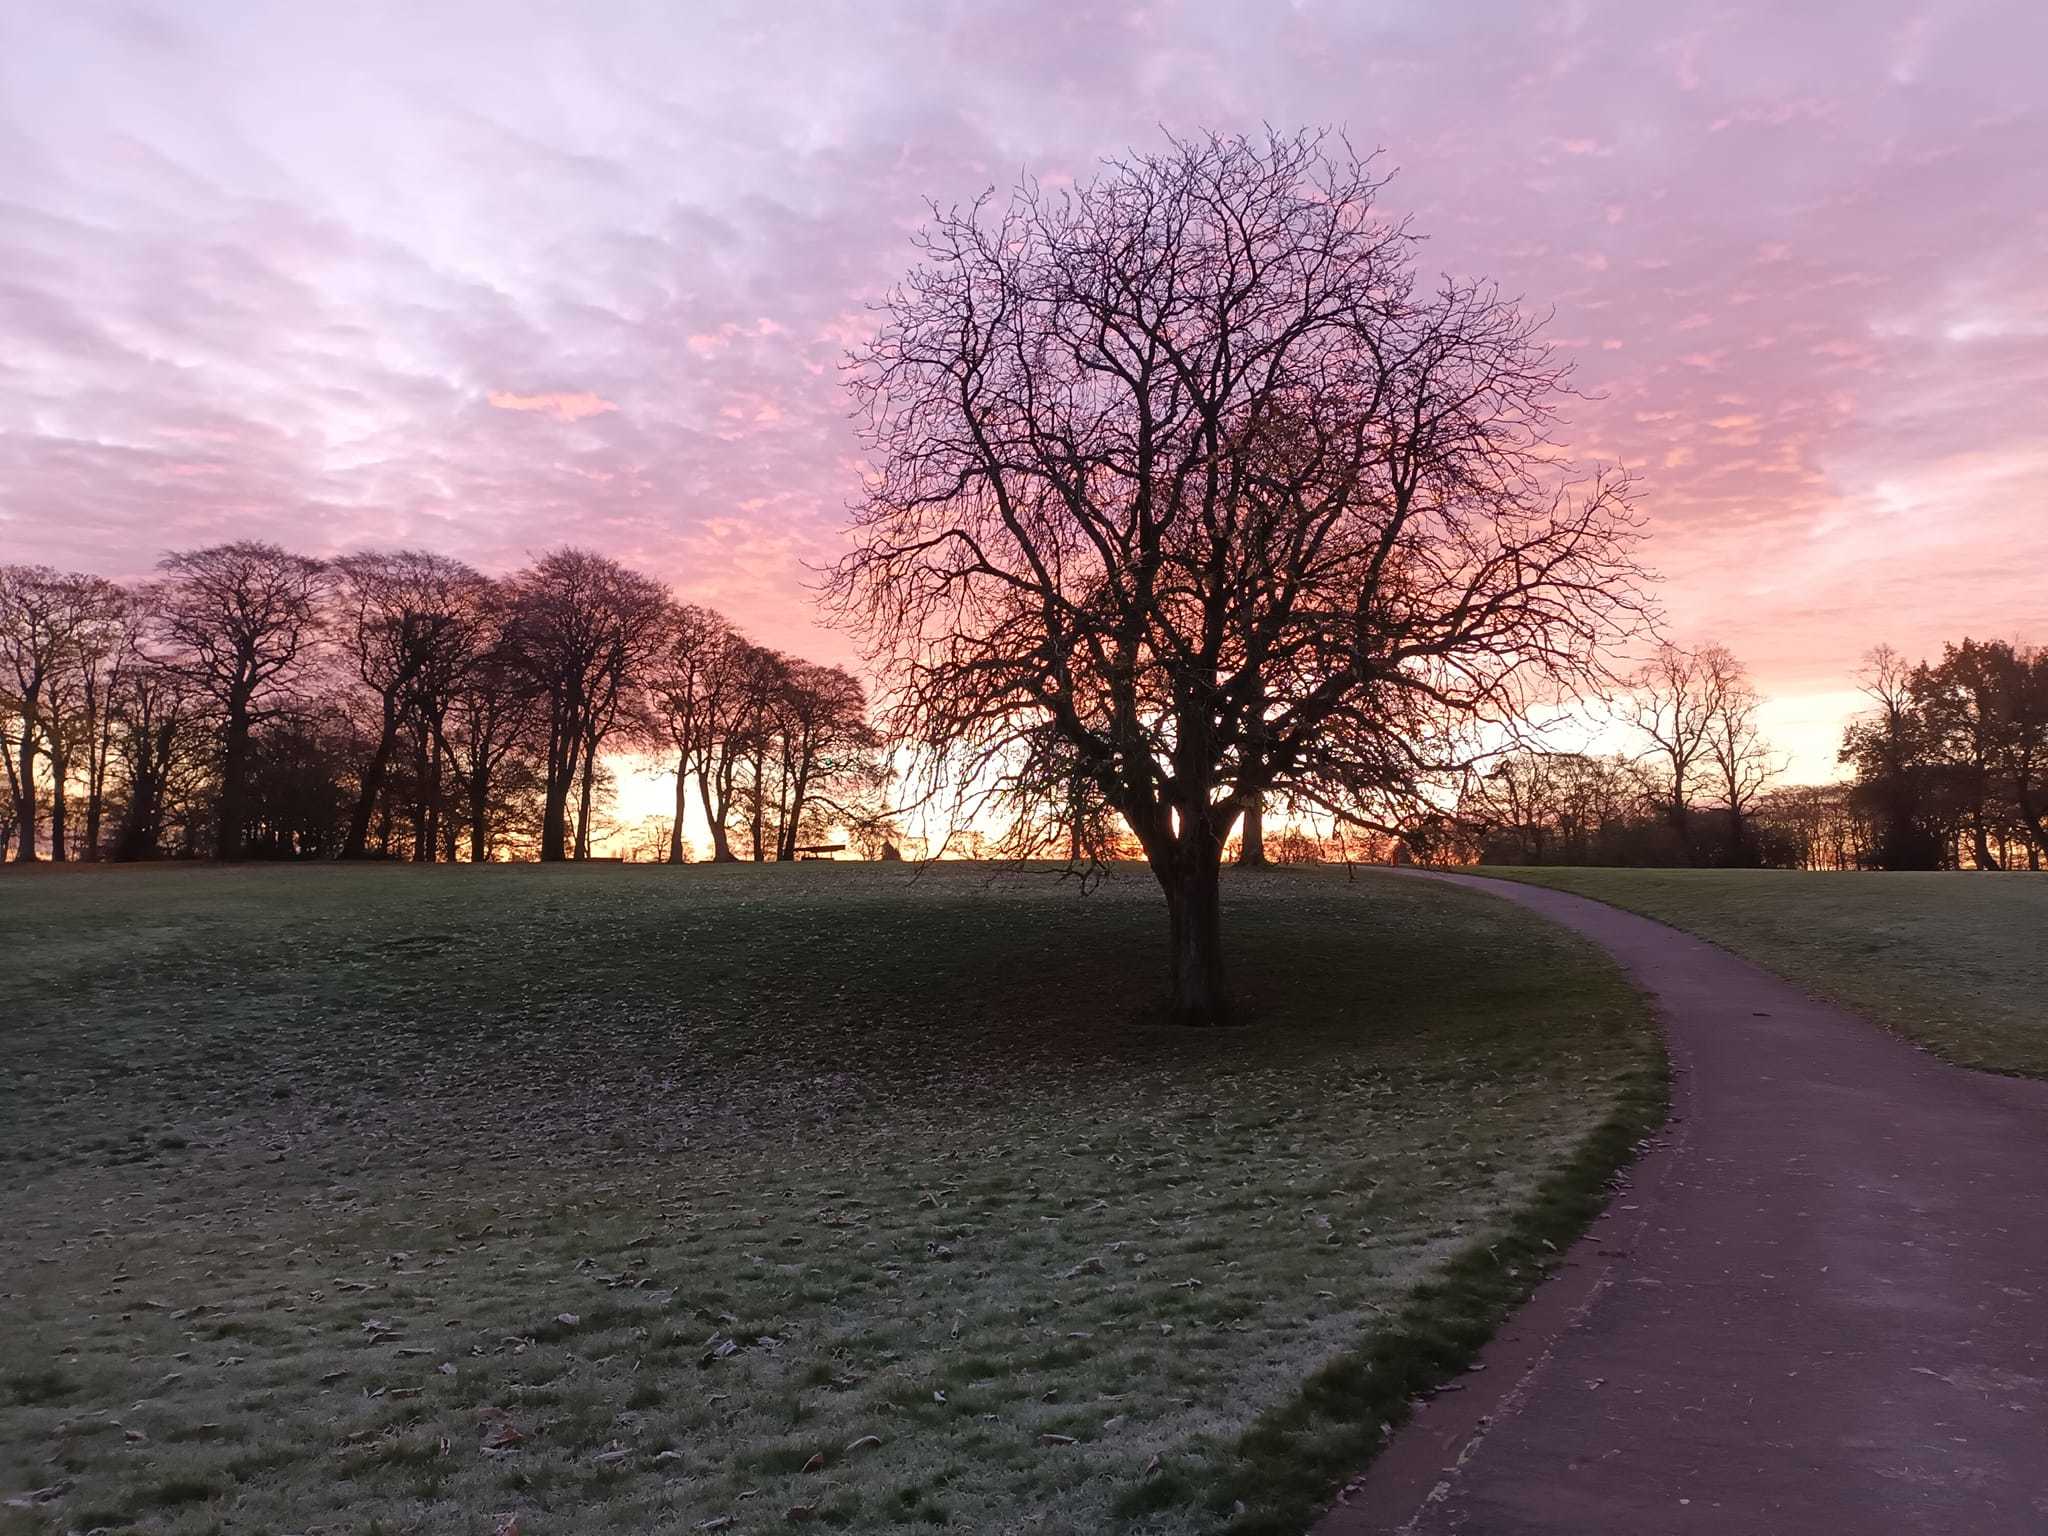 Sunrise at Sherdley Park by Suzie Remadems